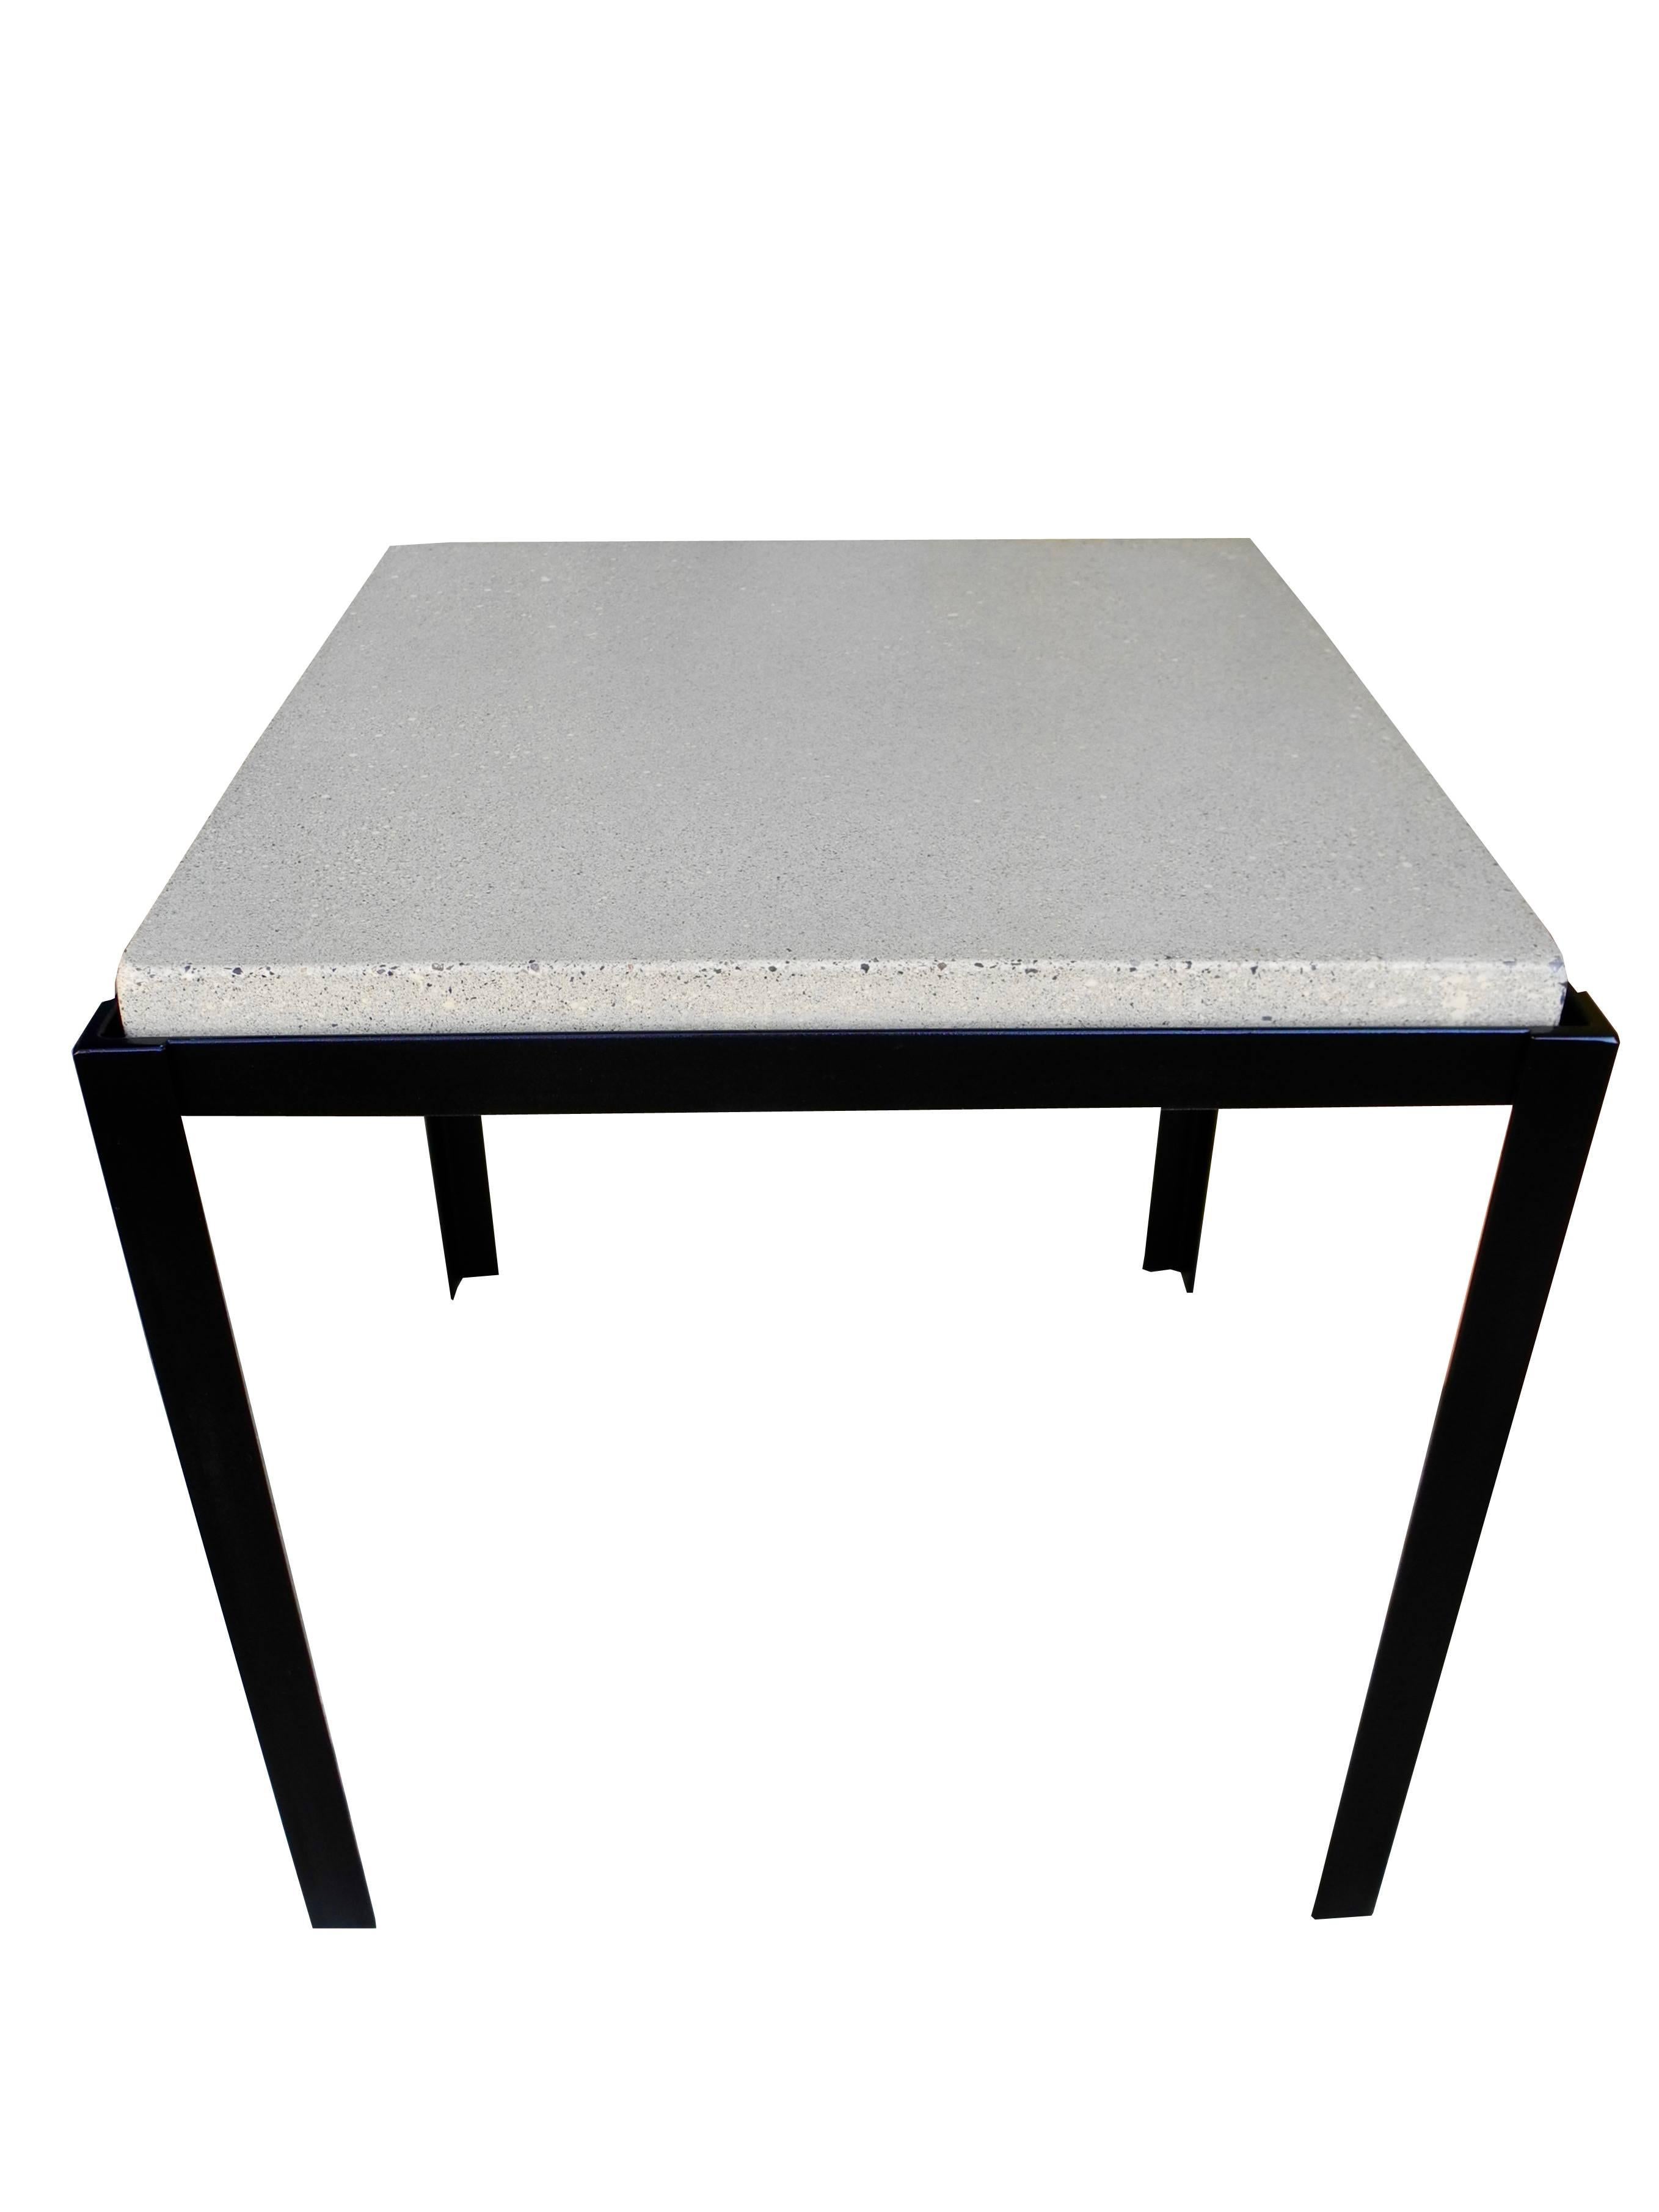 Modern Polished Concrete and Welded Steel Nightstands/Coffee Tables by Corinne Robbins For Sale